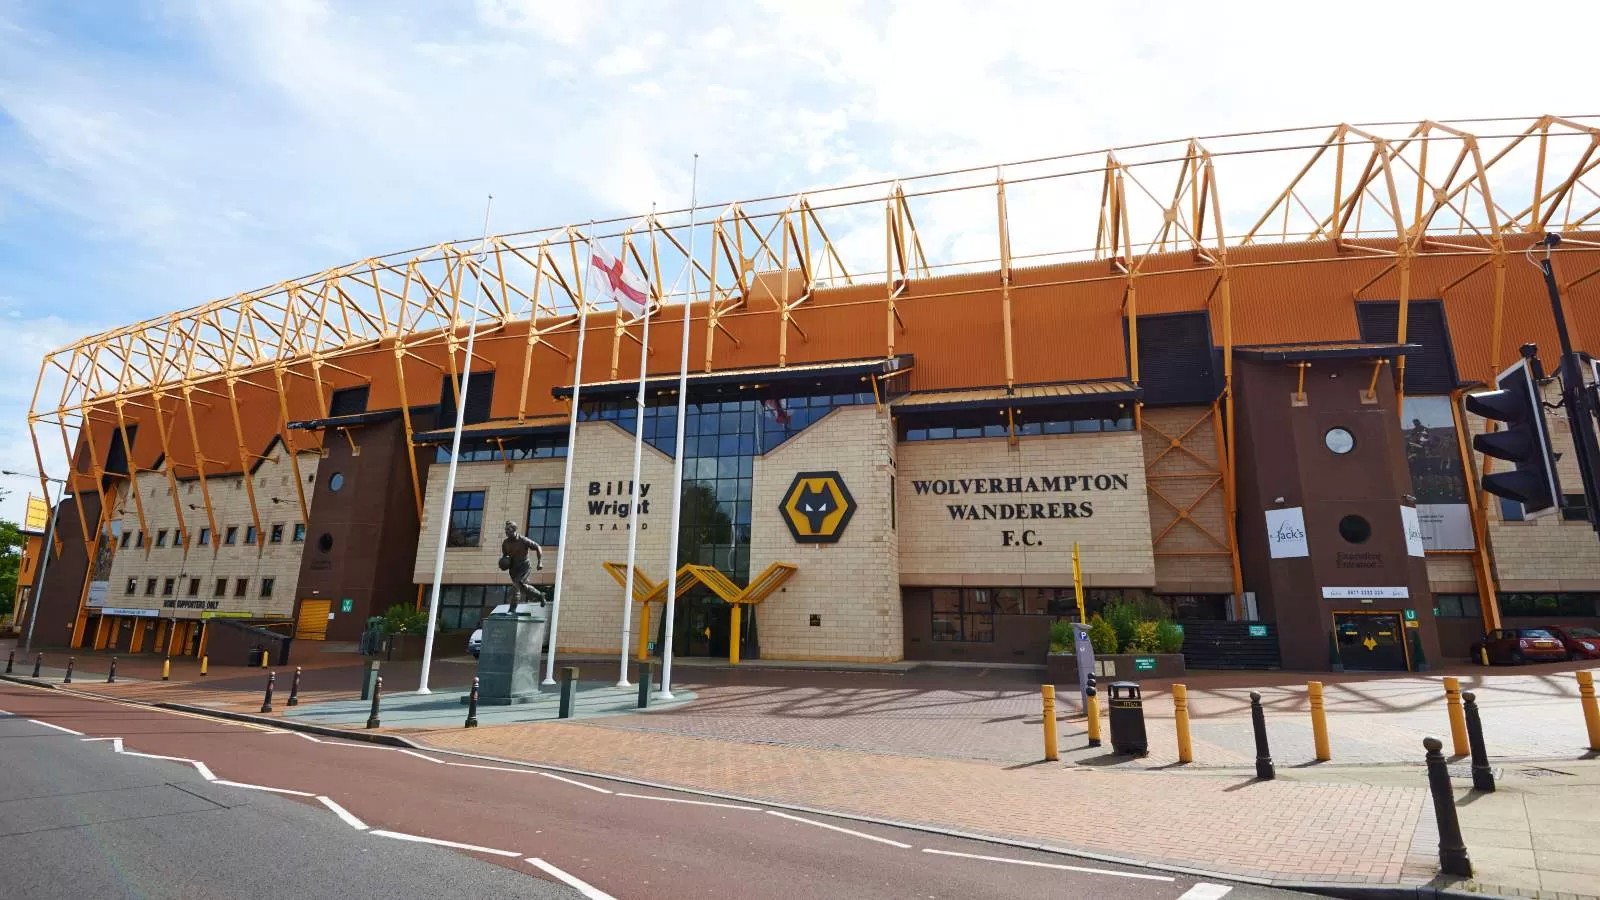 Wolves confirm Premier League rape allegations ‘do not relate to anyone at club’ in X statement